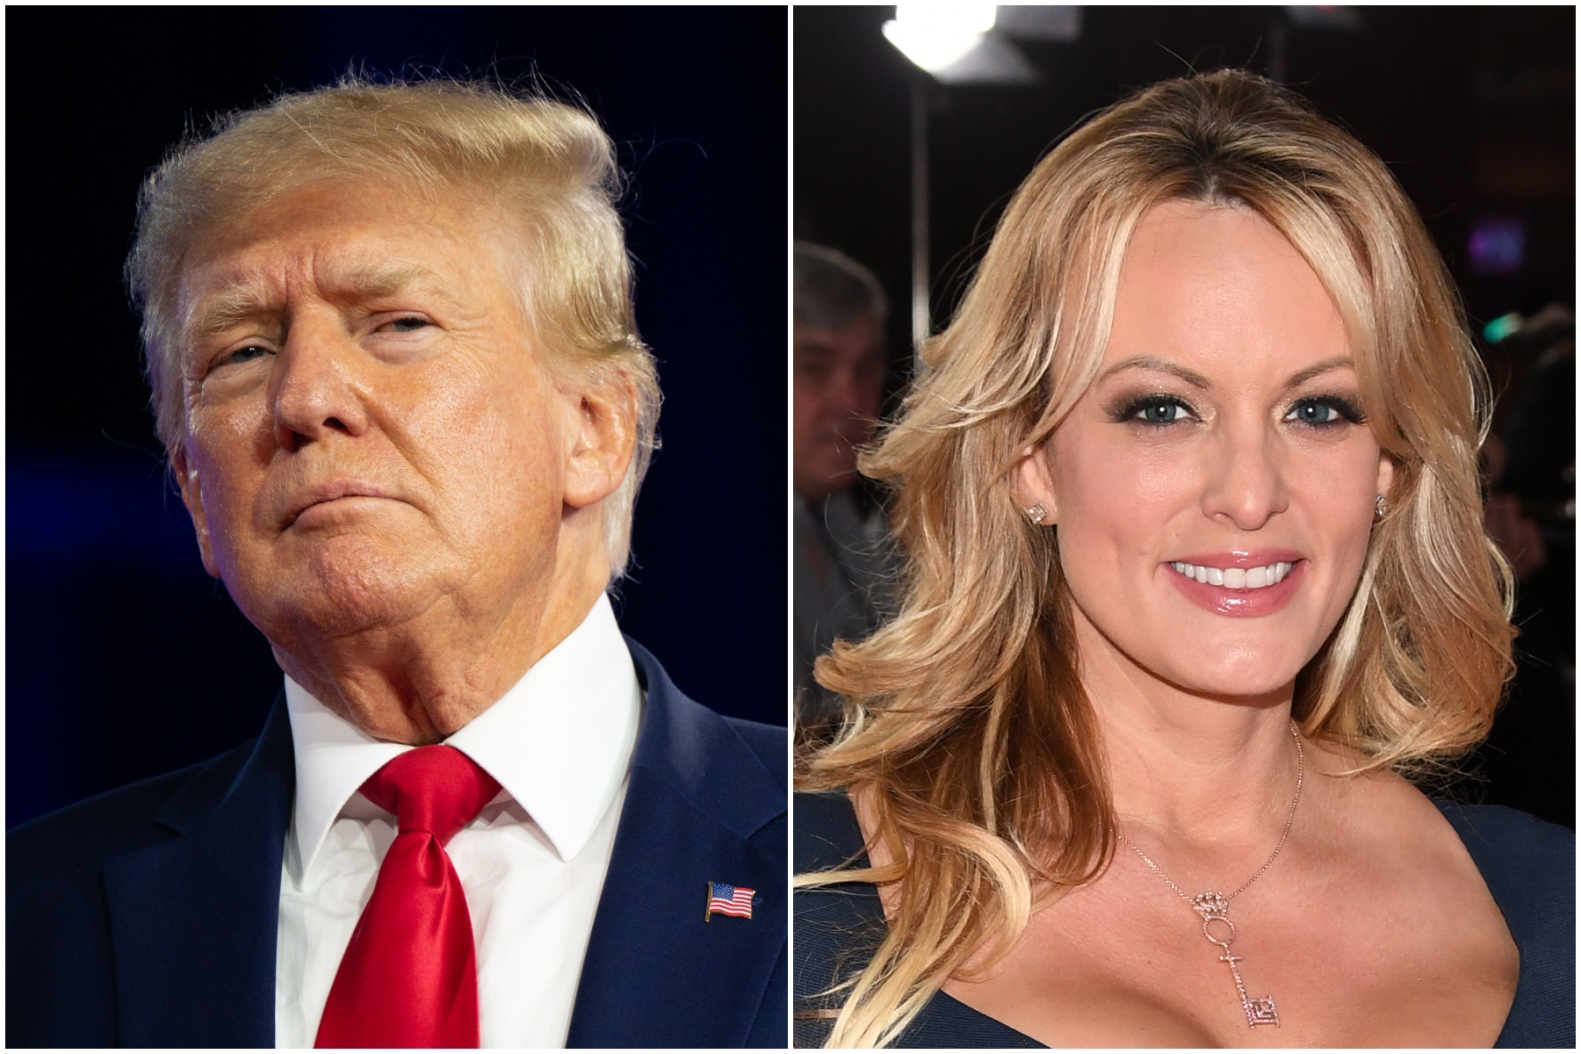 Stormy Daniels: I don’t think Trump should go to prison